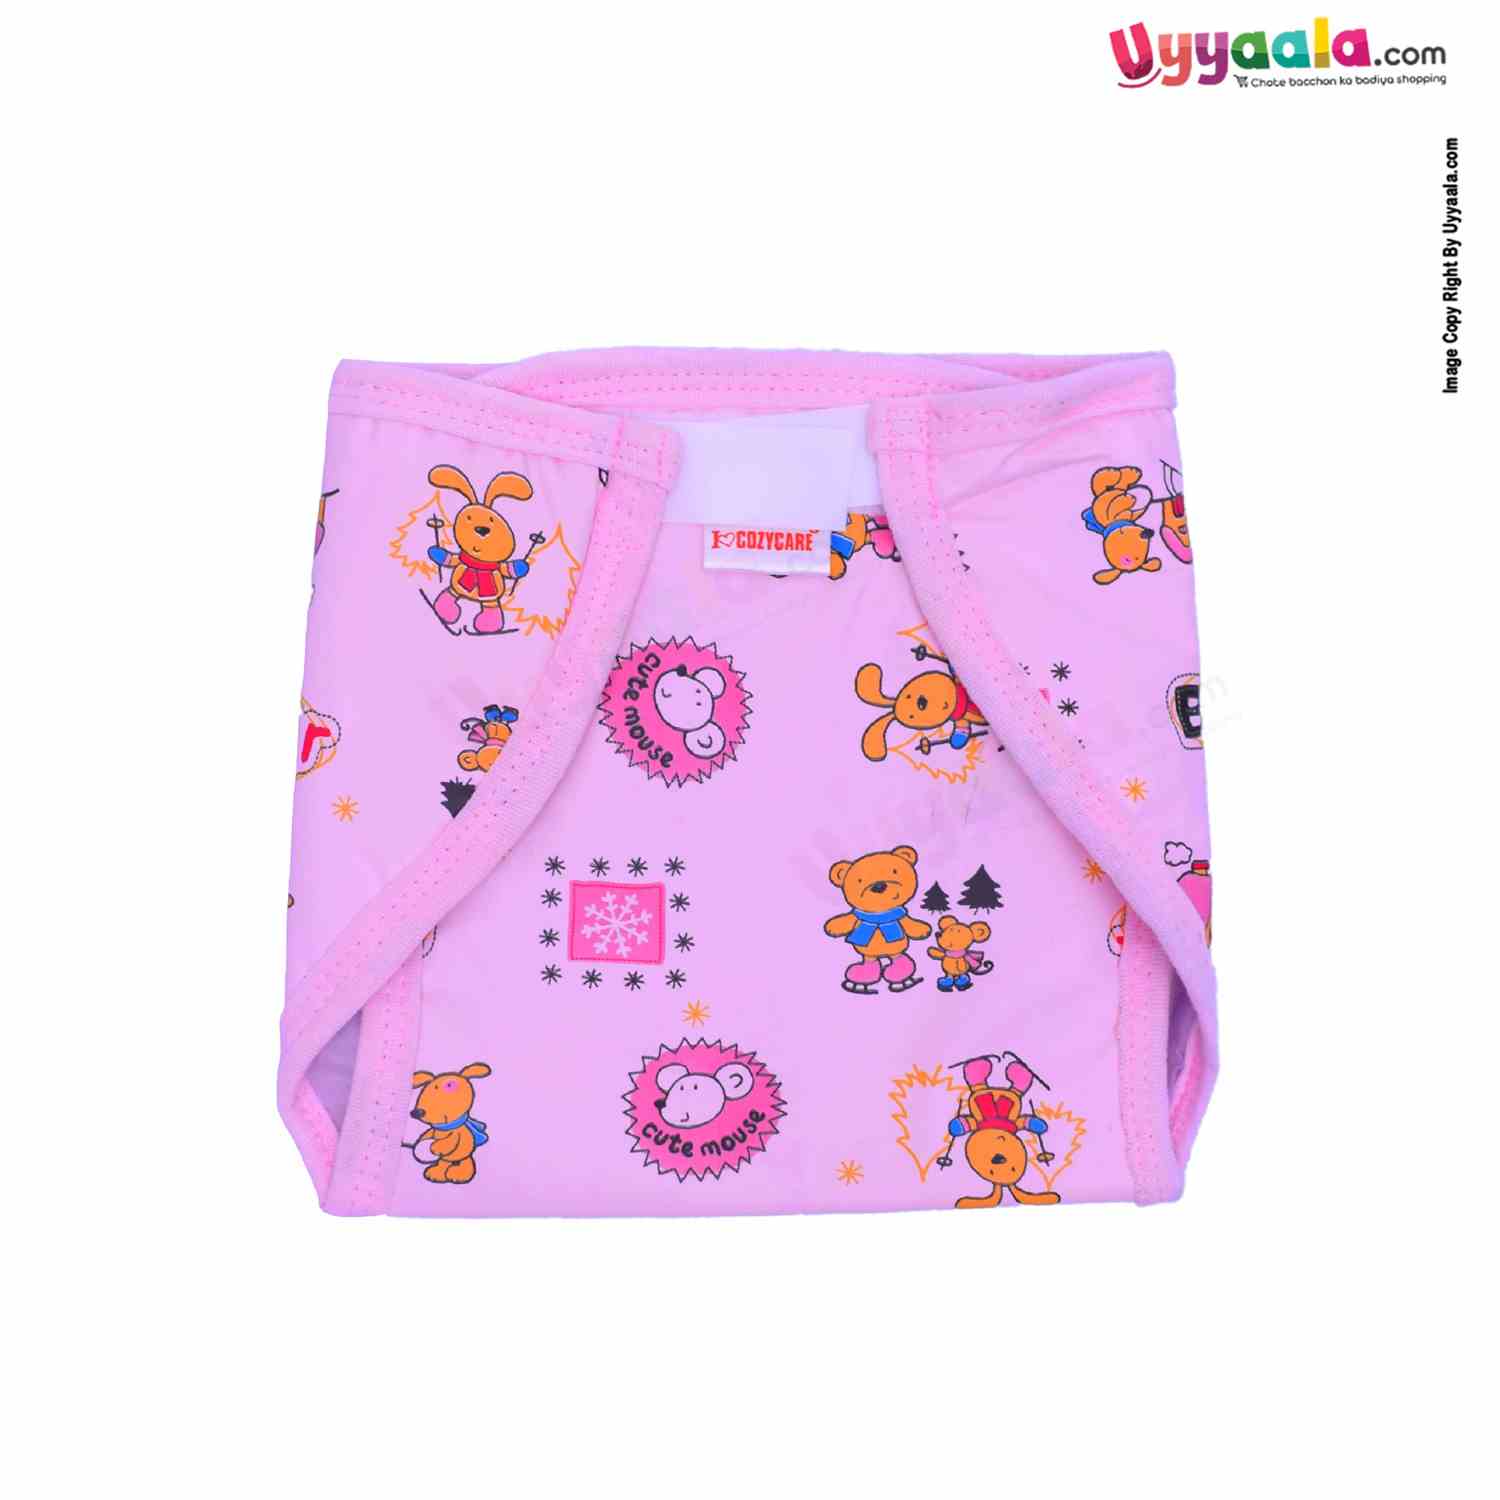 COZYCARE Washable Diapers Plastic, Velcro Bear Print Pink, Blue & Yellow without Pads- 3P Set (M)